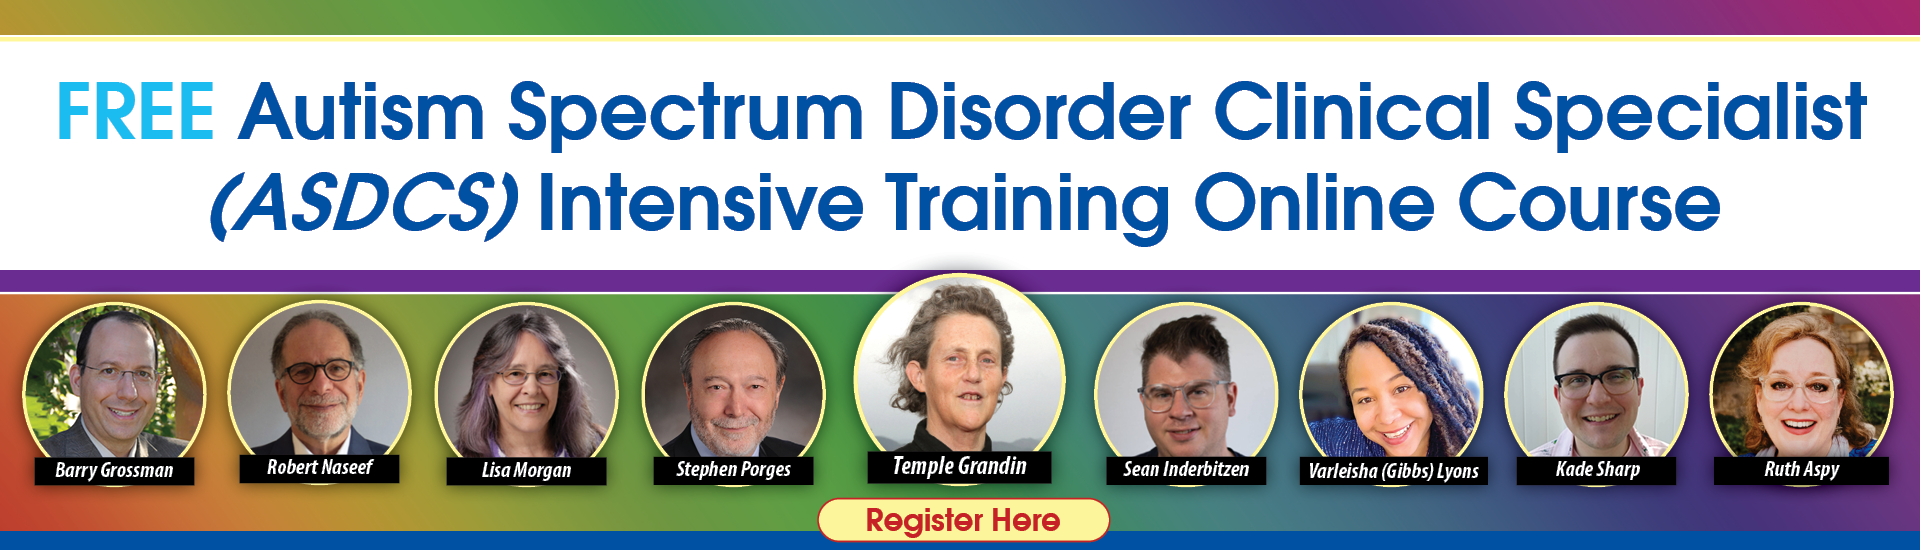 Free Certified Autism Spectrum Disorder Clinical Specialist Intensive Training (ASDCS)